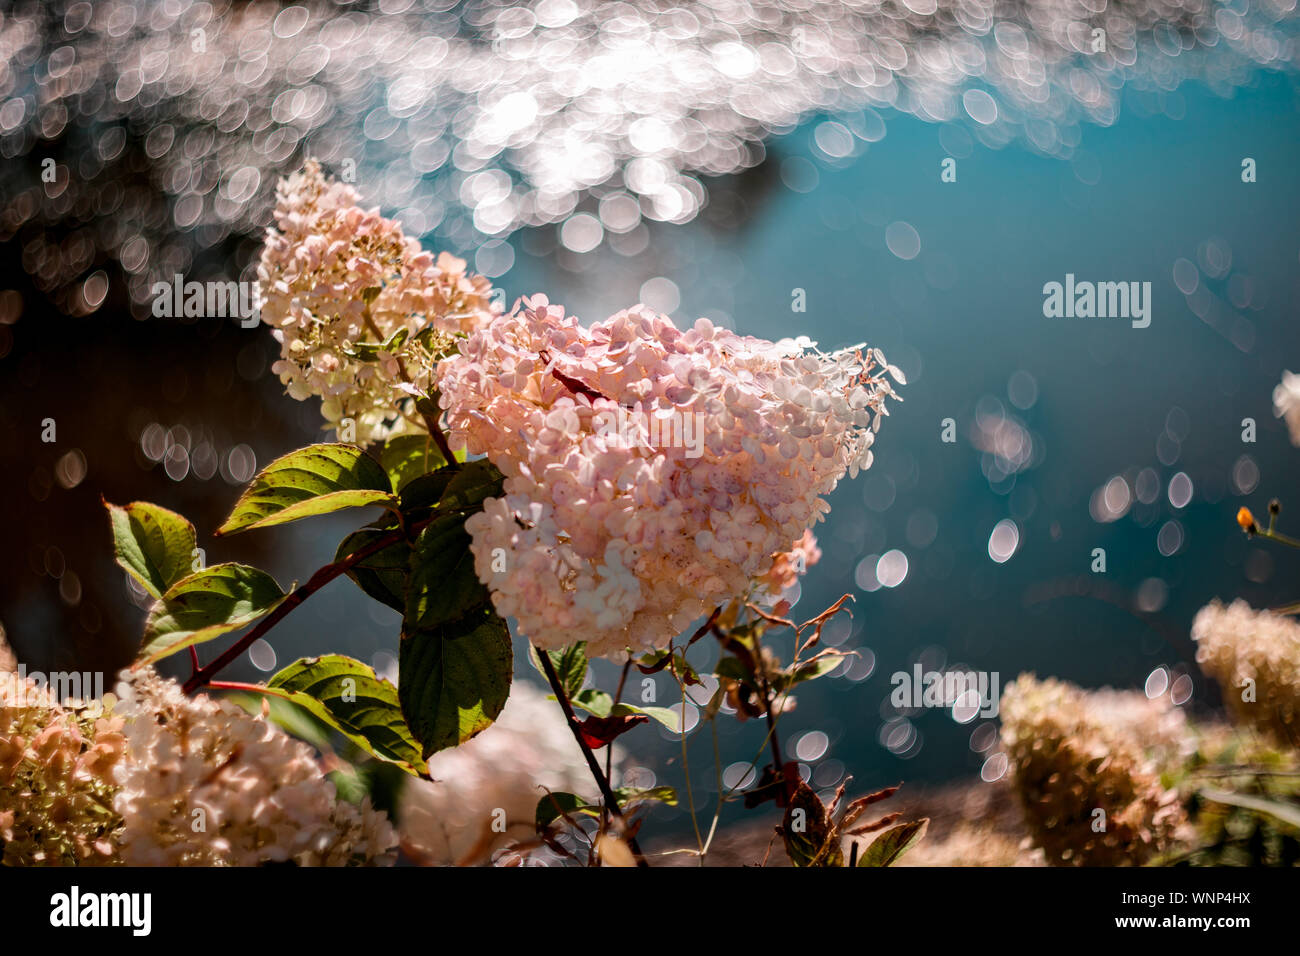 Vibrant,colorful and artistic nature scene with pink and white flowers over lake. Beautiful close up of colorful flowers over blue lake background. Stock Photo